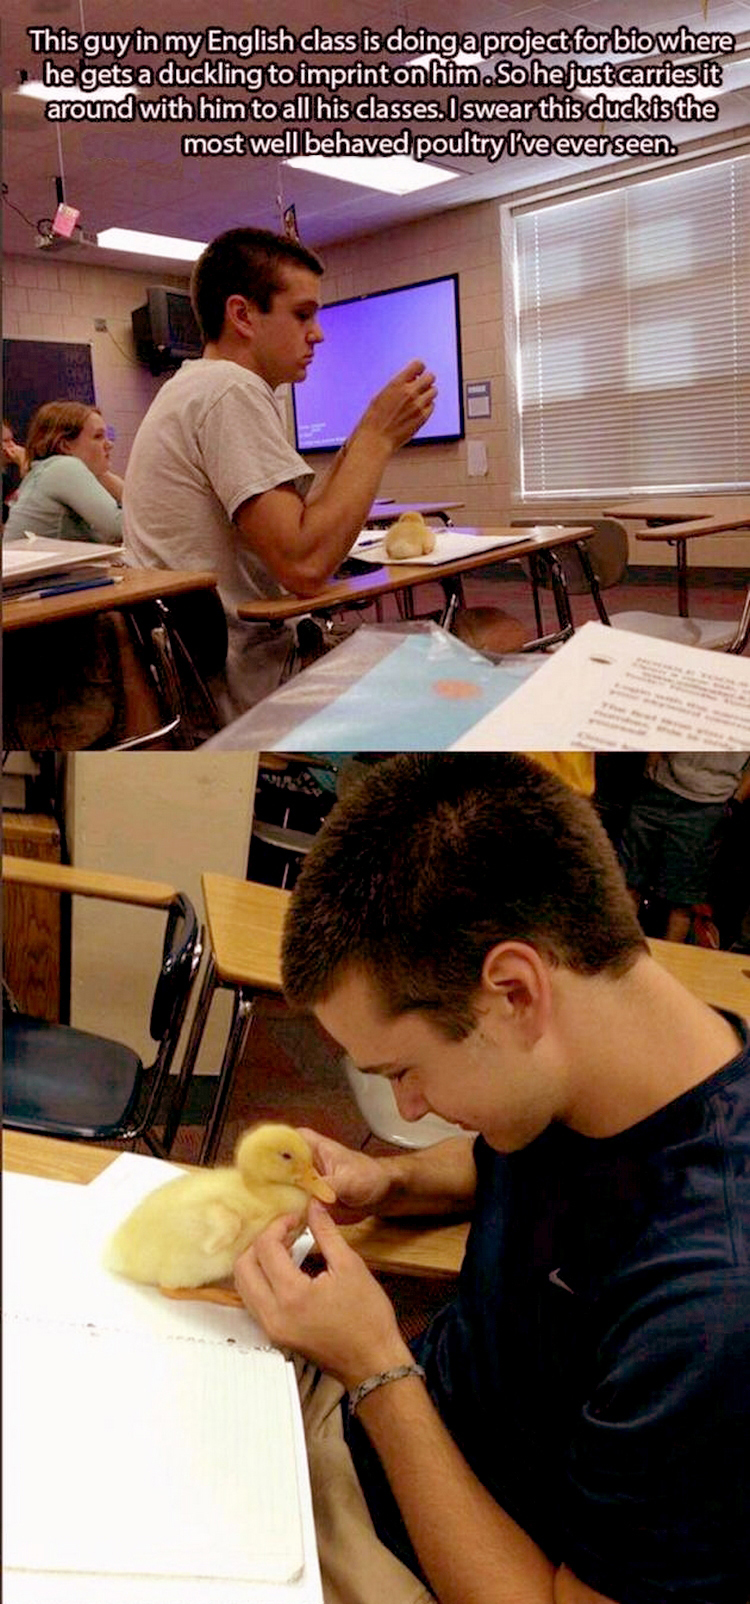 duck imprinting meme - This guy in my English class is doing a project for bio where he gets a duckling to imprint on him.So he just carriesit around with him to all his classes. I swear this durvis the most well behaved poultry Teever seen